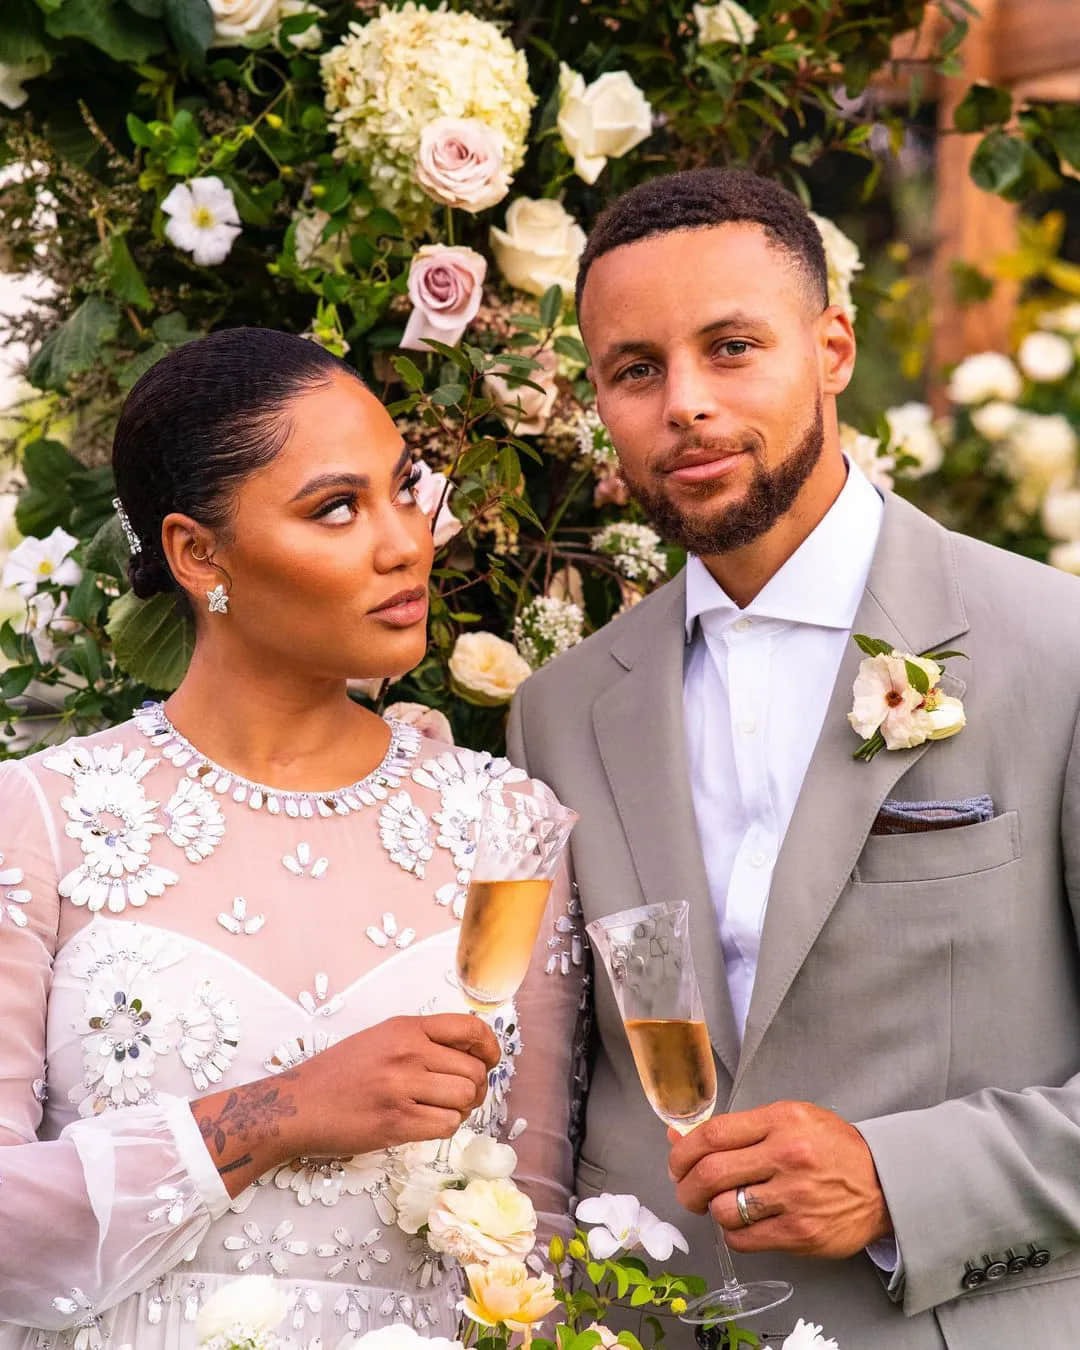 likhoa stephen curry surprised everyone when he organized a memorable th wedding anniversary for his wife ayesha curry 6548fc6e2662f Stephen Curry Surprised Everyone When He Organized A Memorable 10th Wedding Anniversary For His Wife Ayesha Curry.